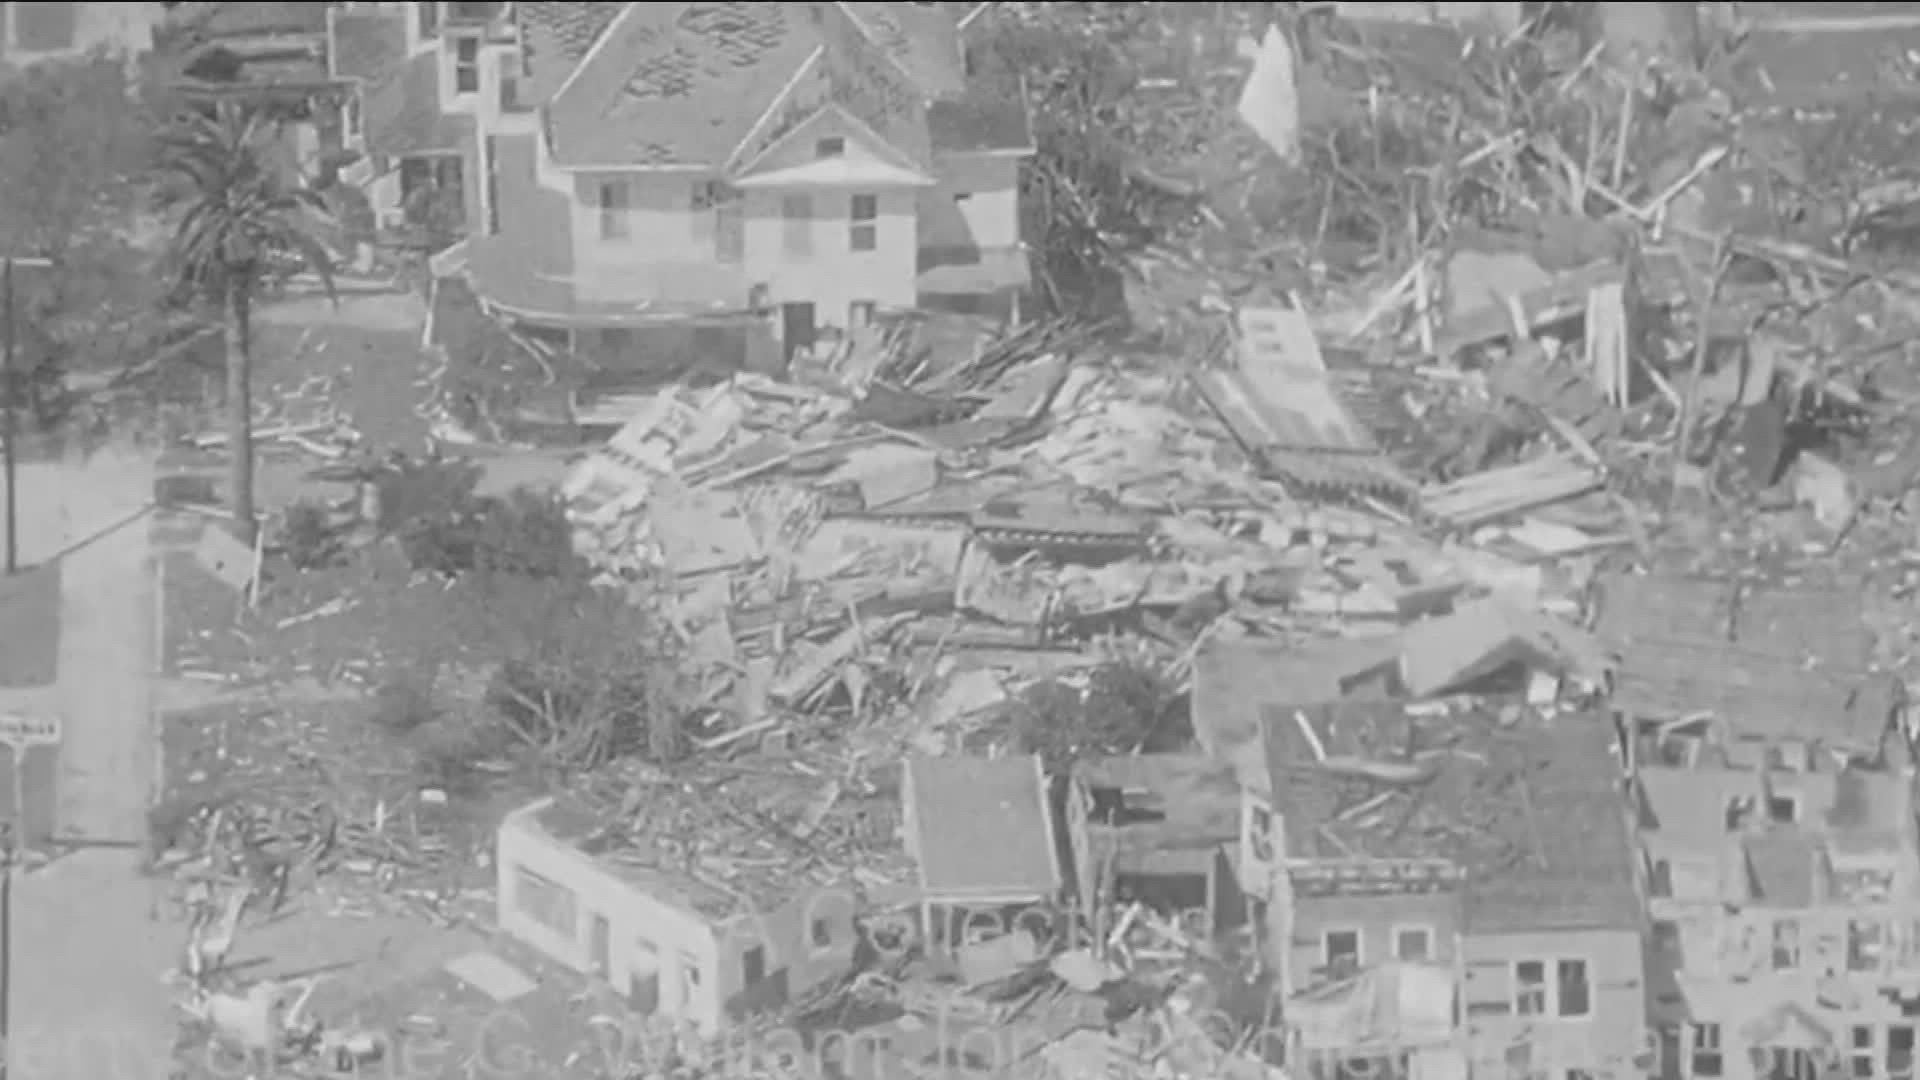 In the past, September has been a particularly destructive month for storms along the Texas coast. Here are some of the most devastating in history.